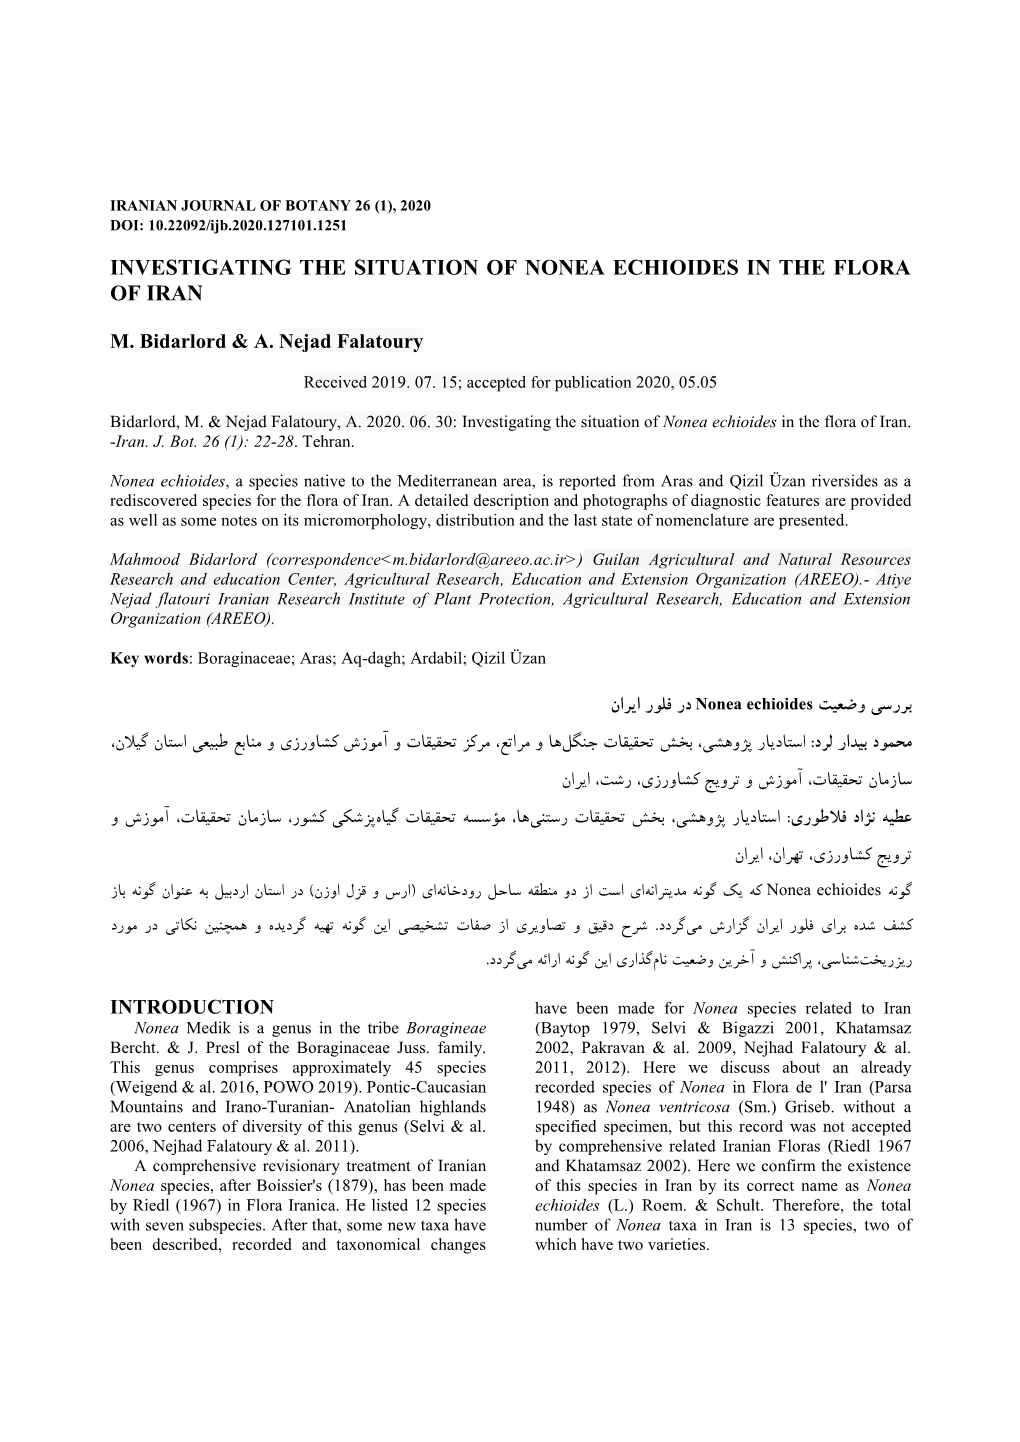 Investigating the Situation of Nonea Echioides in the Flora of Iran